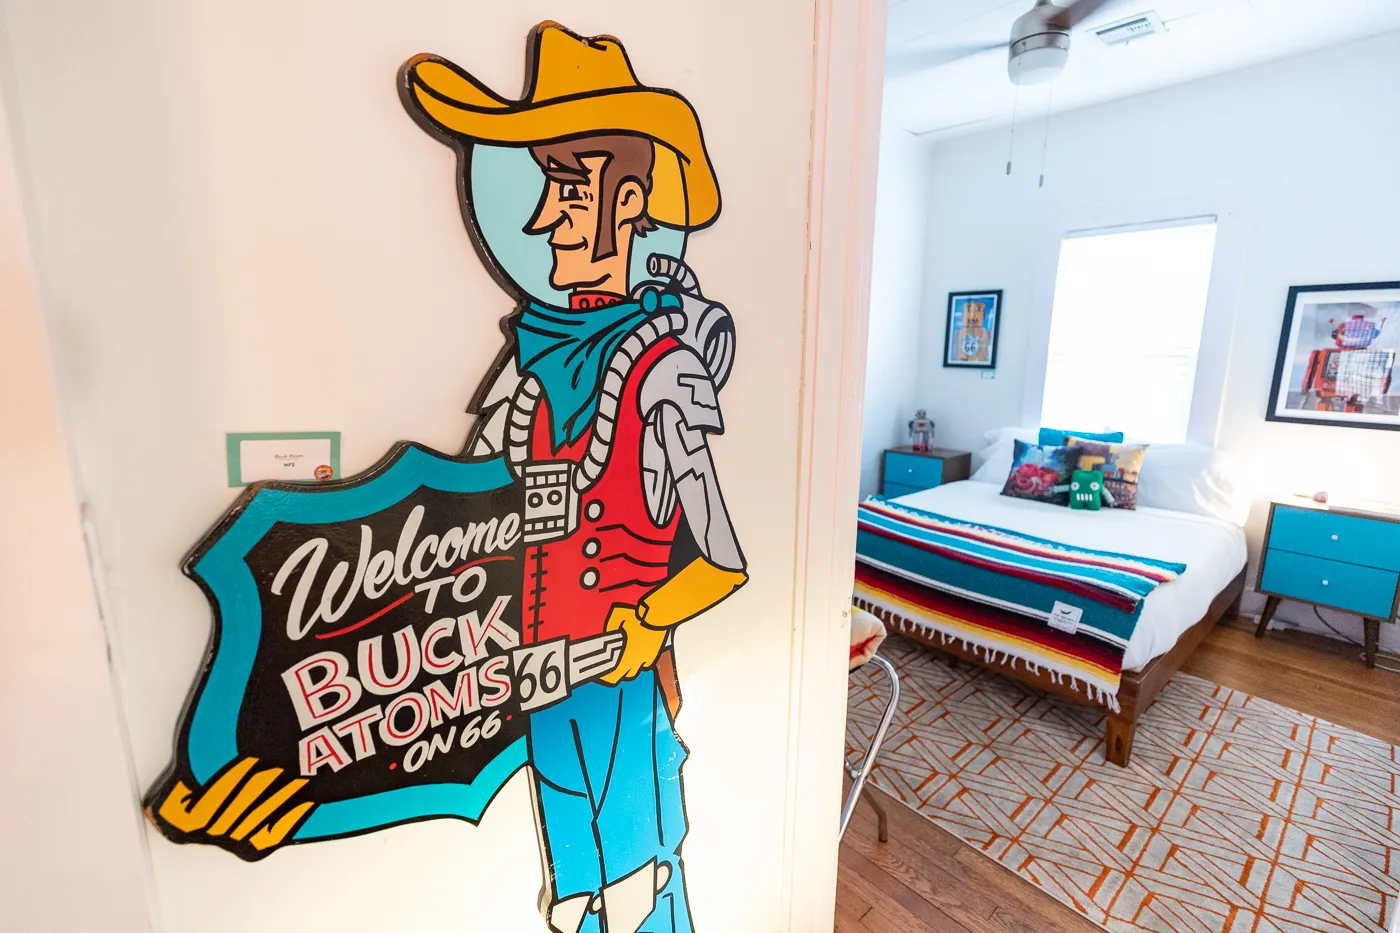 Sign for Welcome to Buck's Cosmic Crash Pad on Route 66 - Route 66 AirBNB in Tulsa, Oklahoma